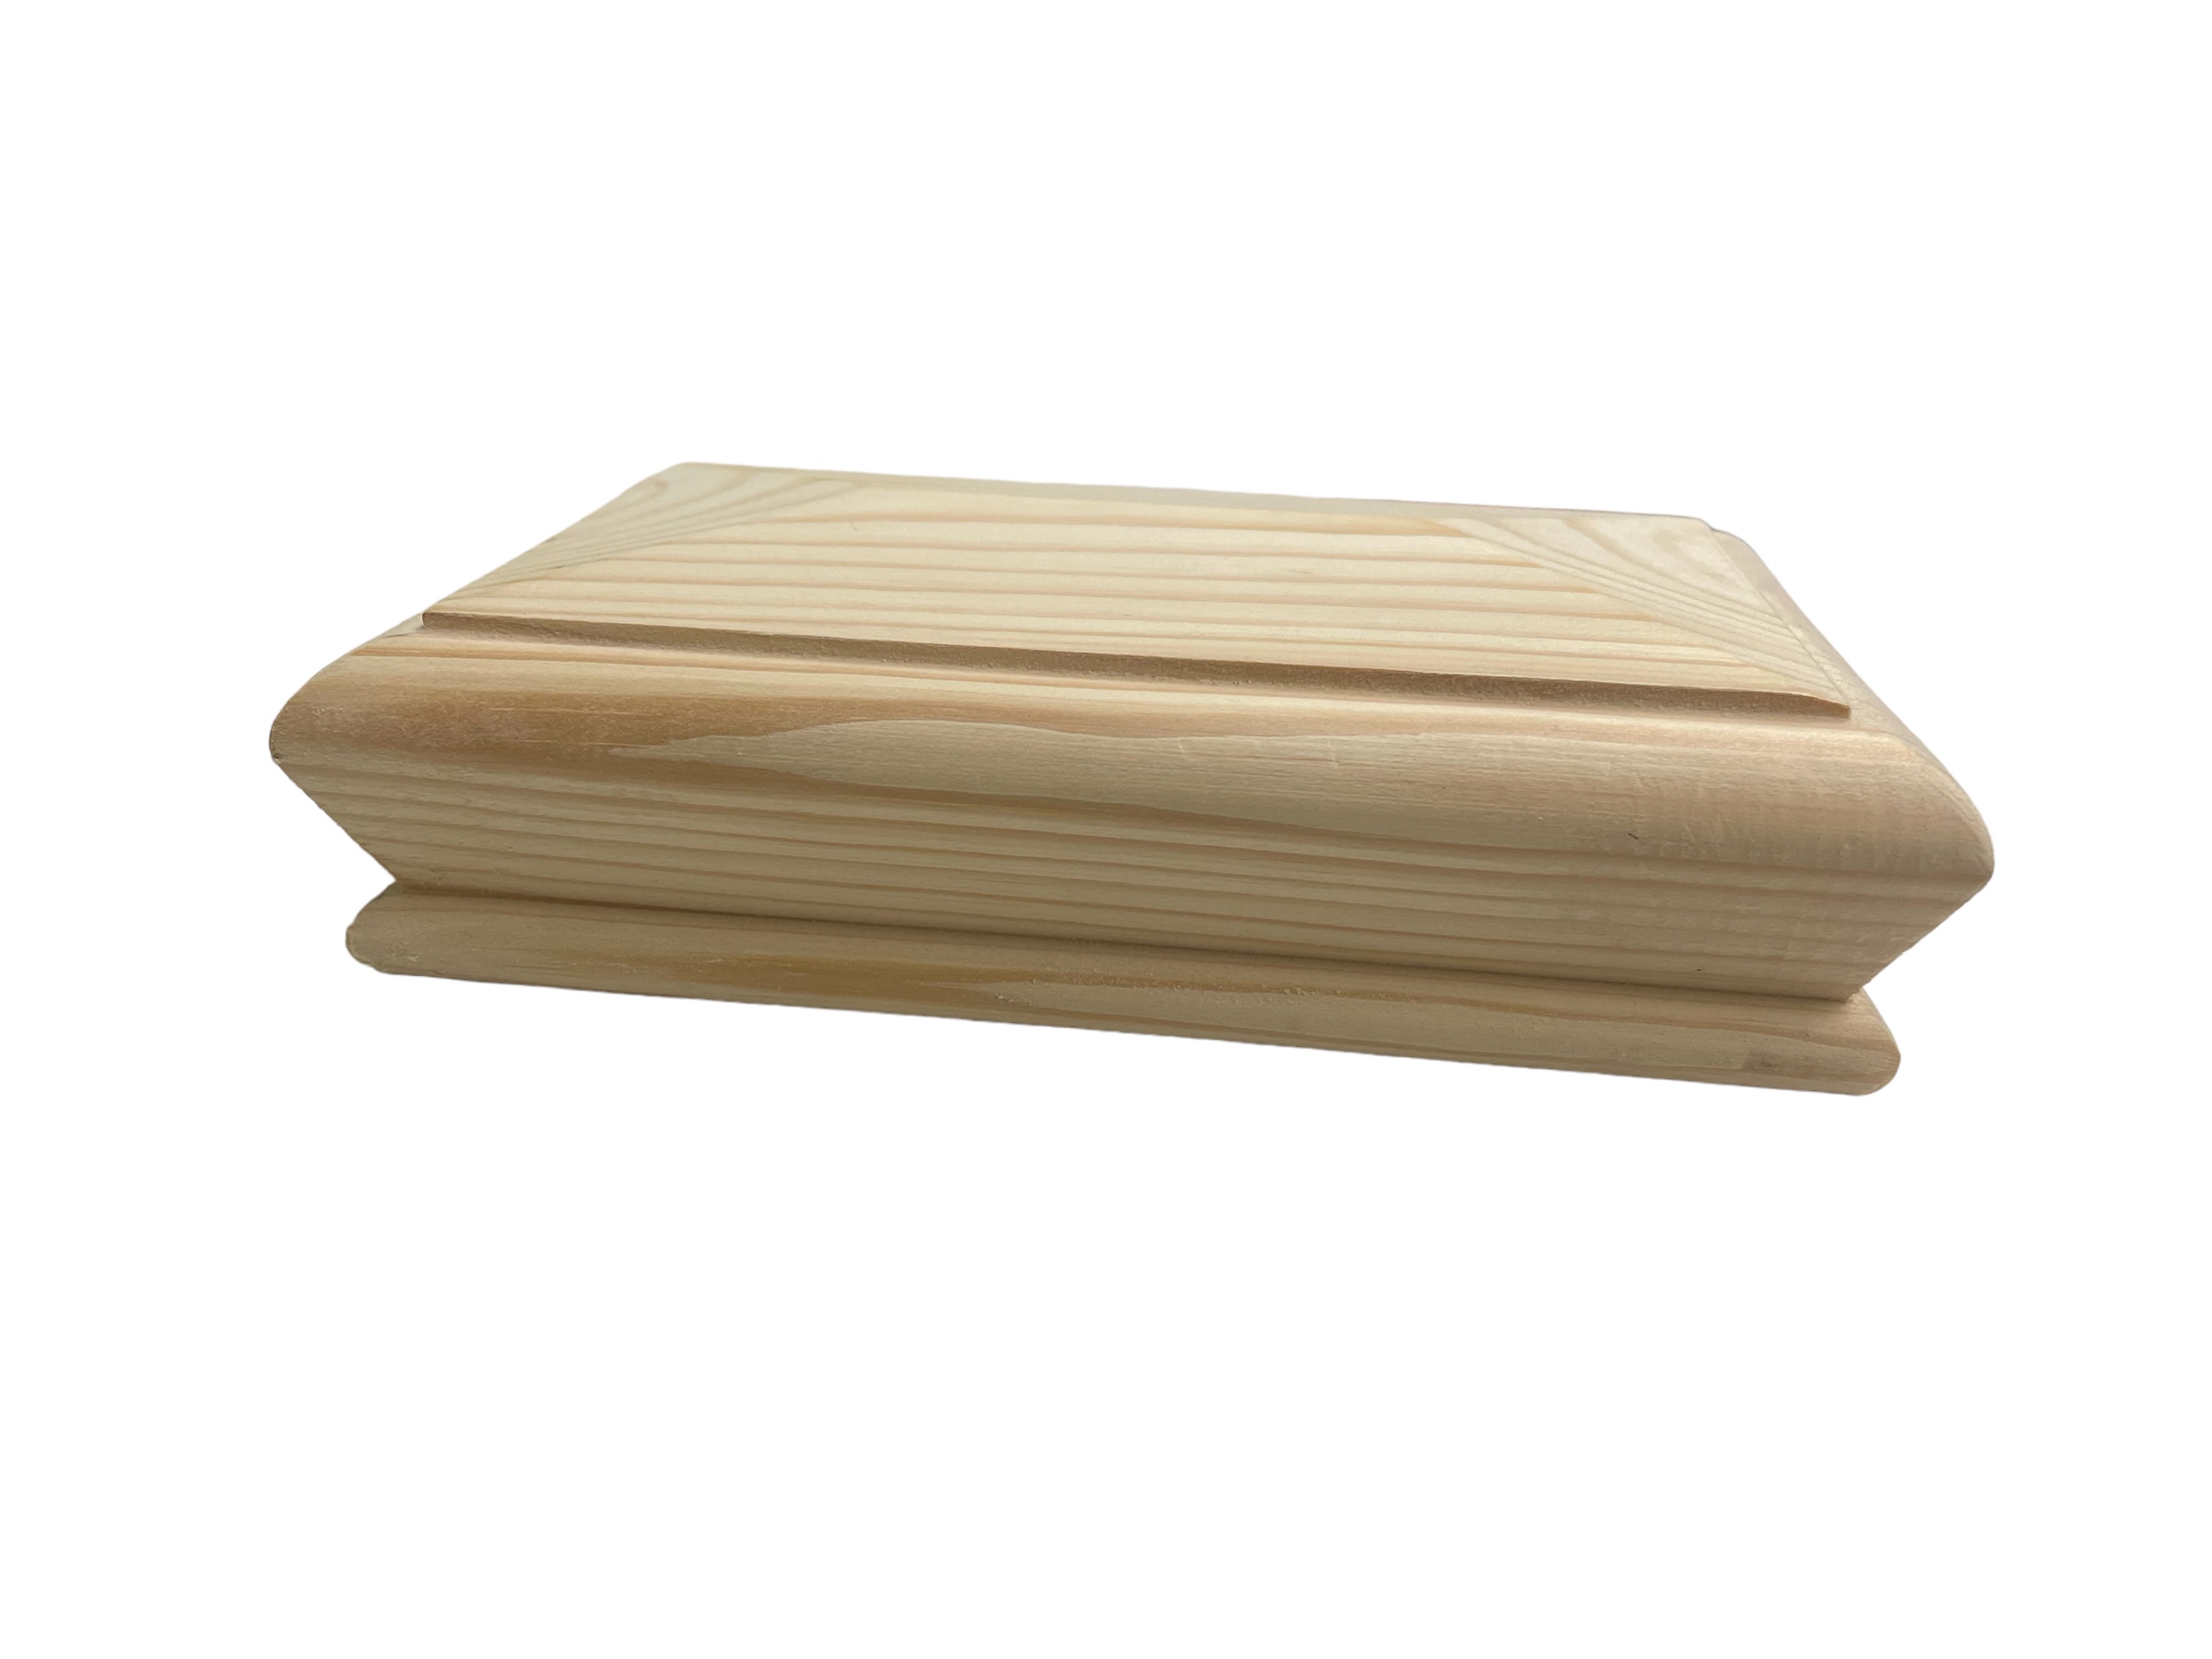 70mm Pine Square Double Pyramid Newel Cap